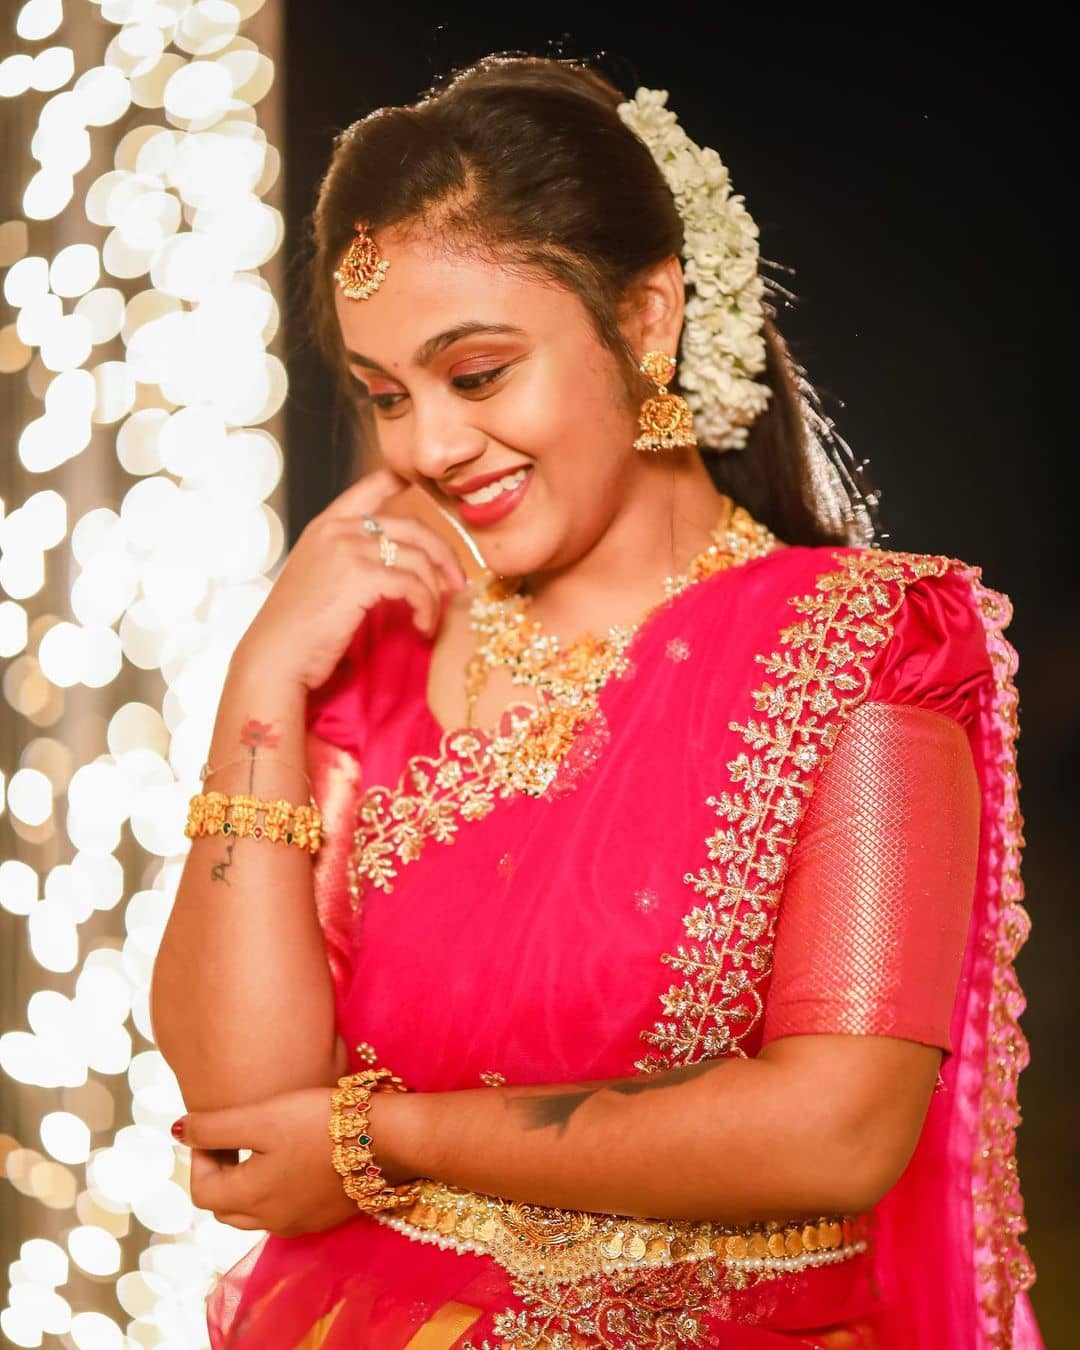 pranams official, amrutha prany youtube channel, vlogs, videos, house